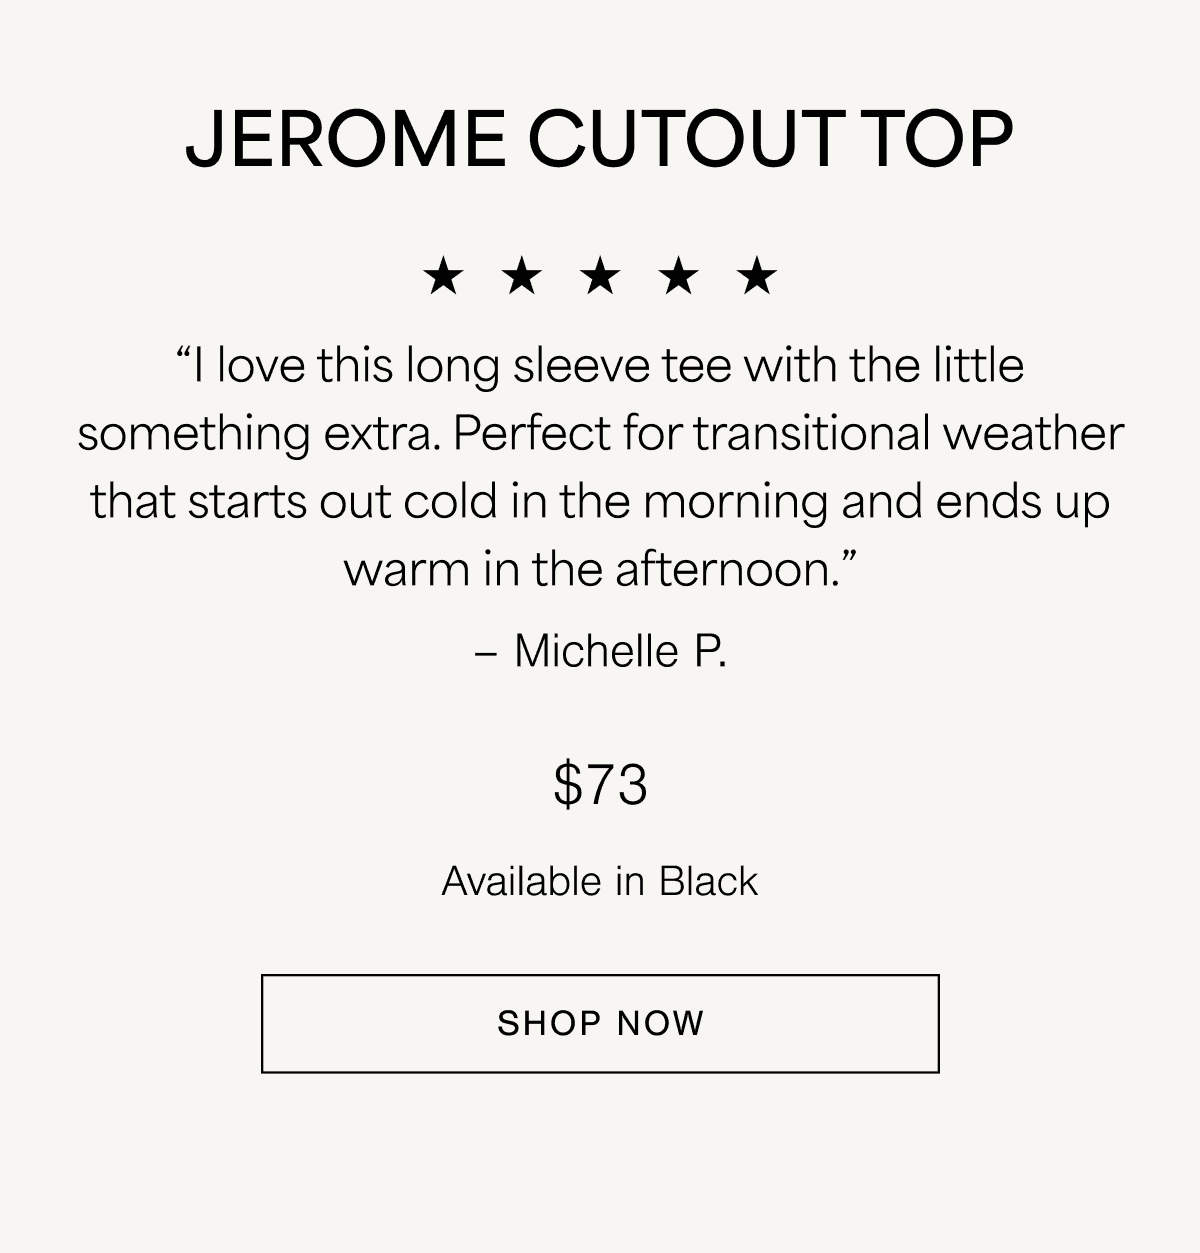 The Jerome Cutout Top